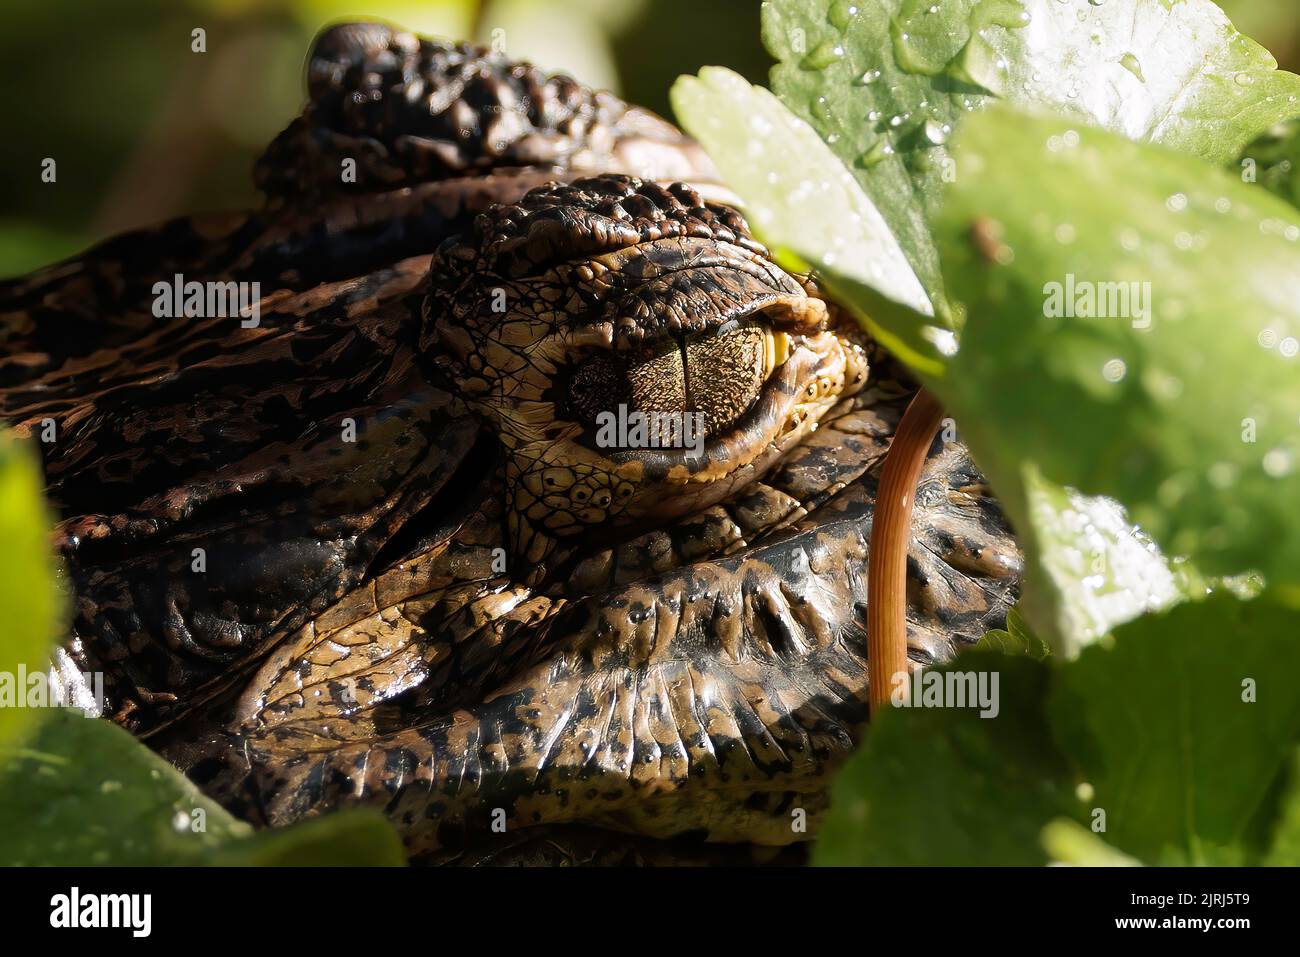 Close-up of an Alligator (Alligator mississippiensis) forehead and eye in Tortuguero river, Costa Rica Stock Photo